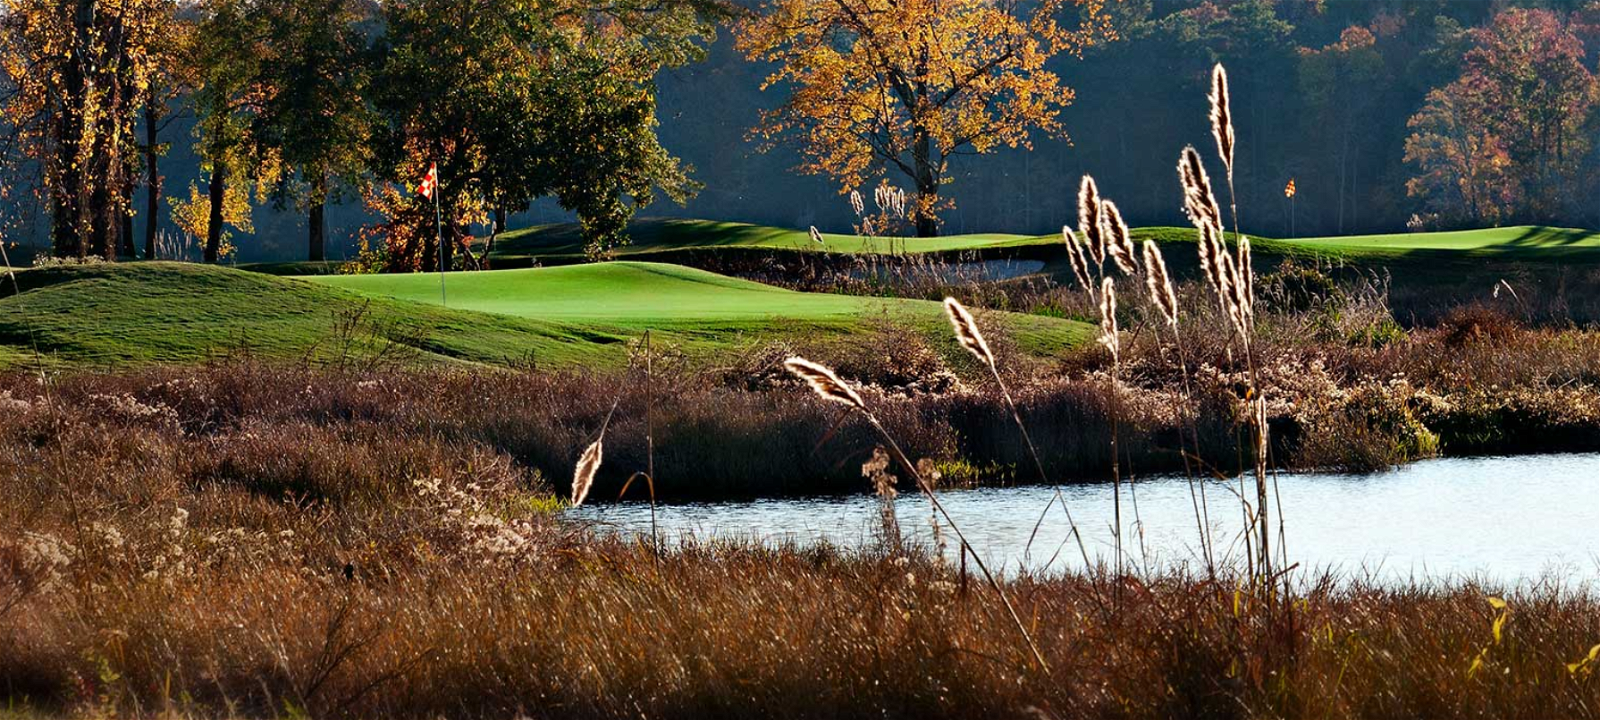 Golf Vacation Package - RTJ Golf Trail - Grand National Stay & Play from $240 per day!